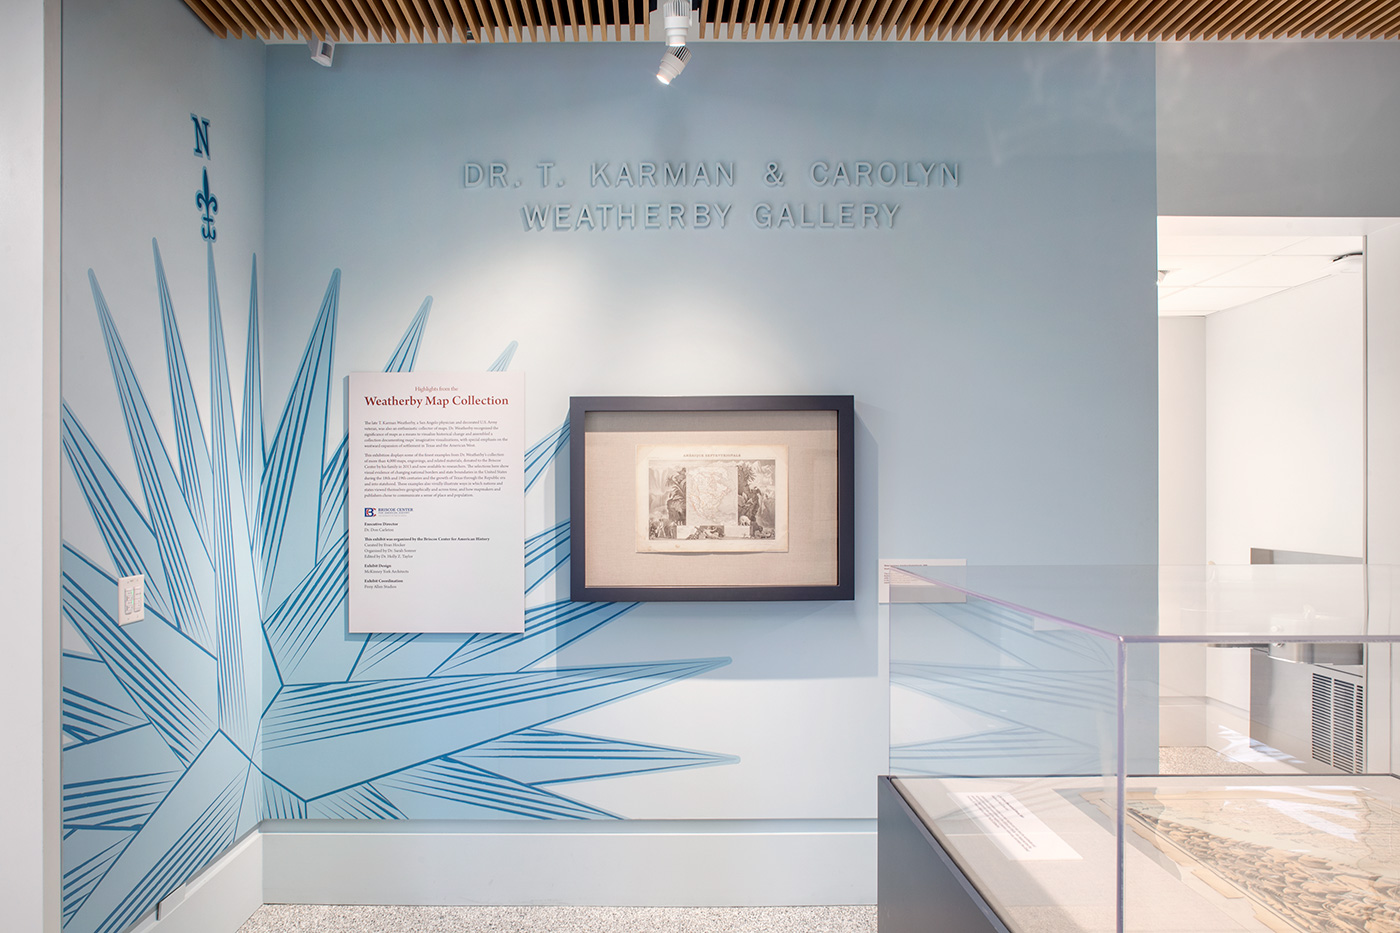 An interior wall that has Dr. T. Kartman & Carolyn Weatherby Gallery written on it.